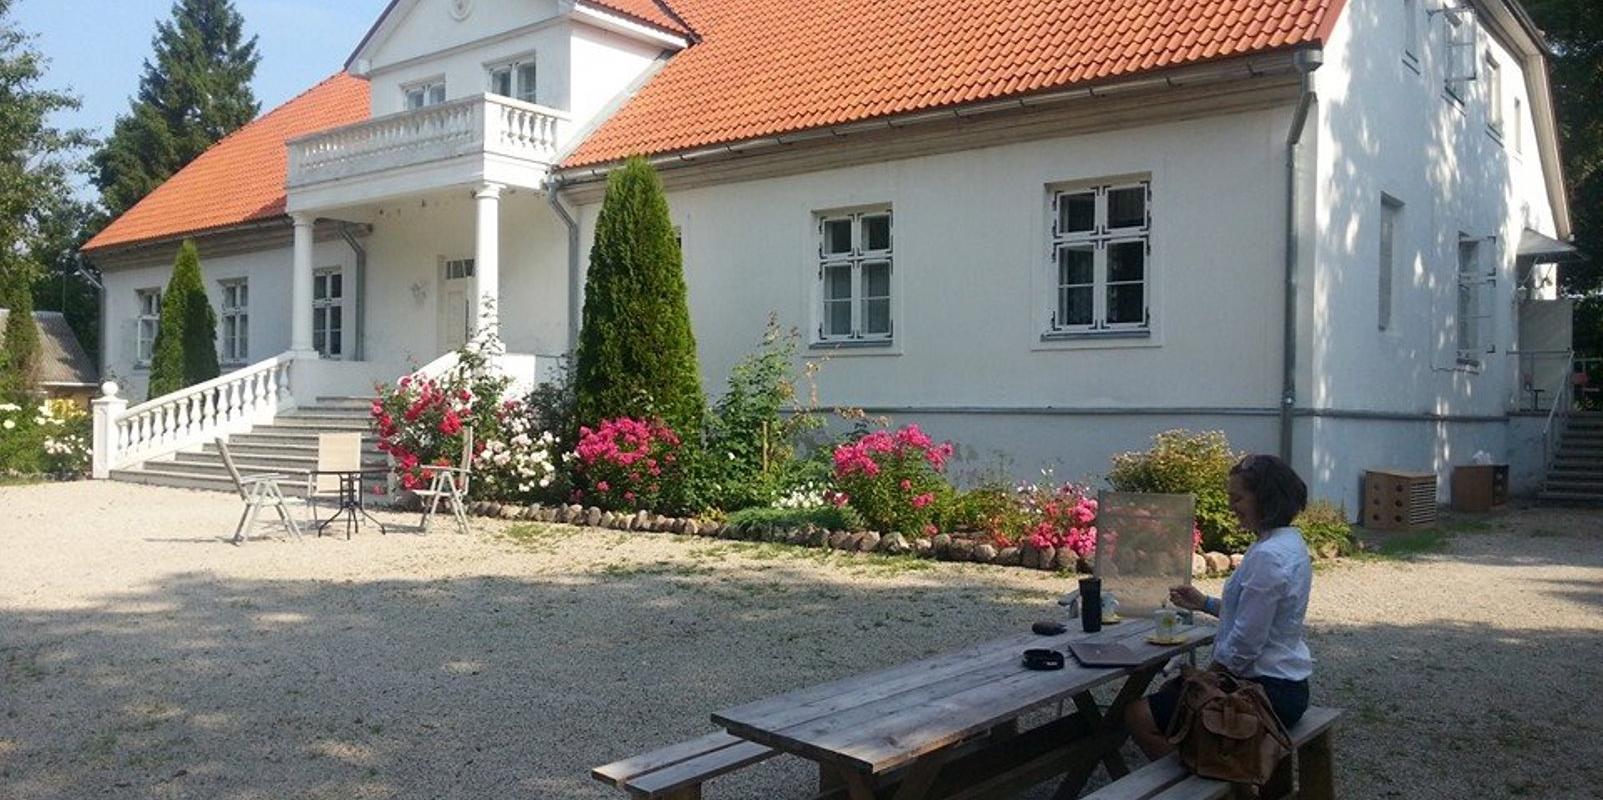 Lyckholm Museum and Saare Manor